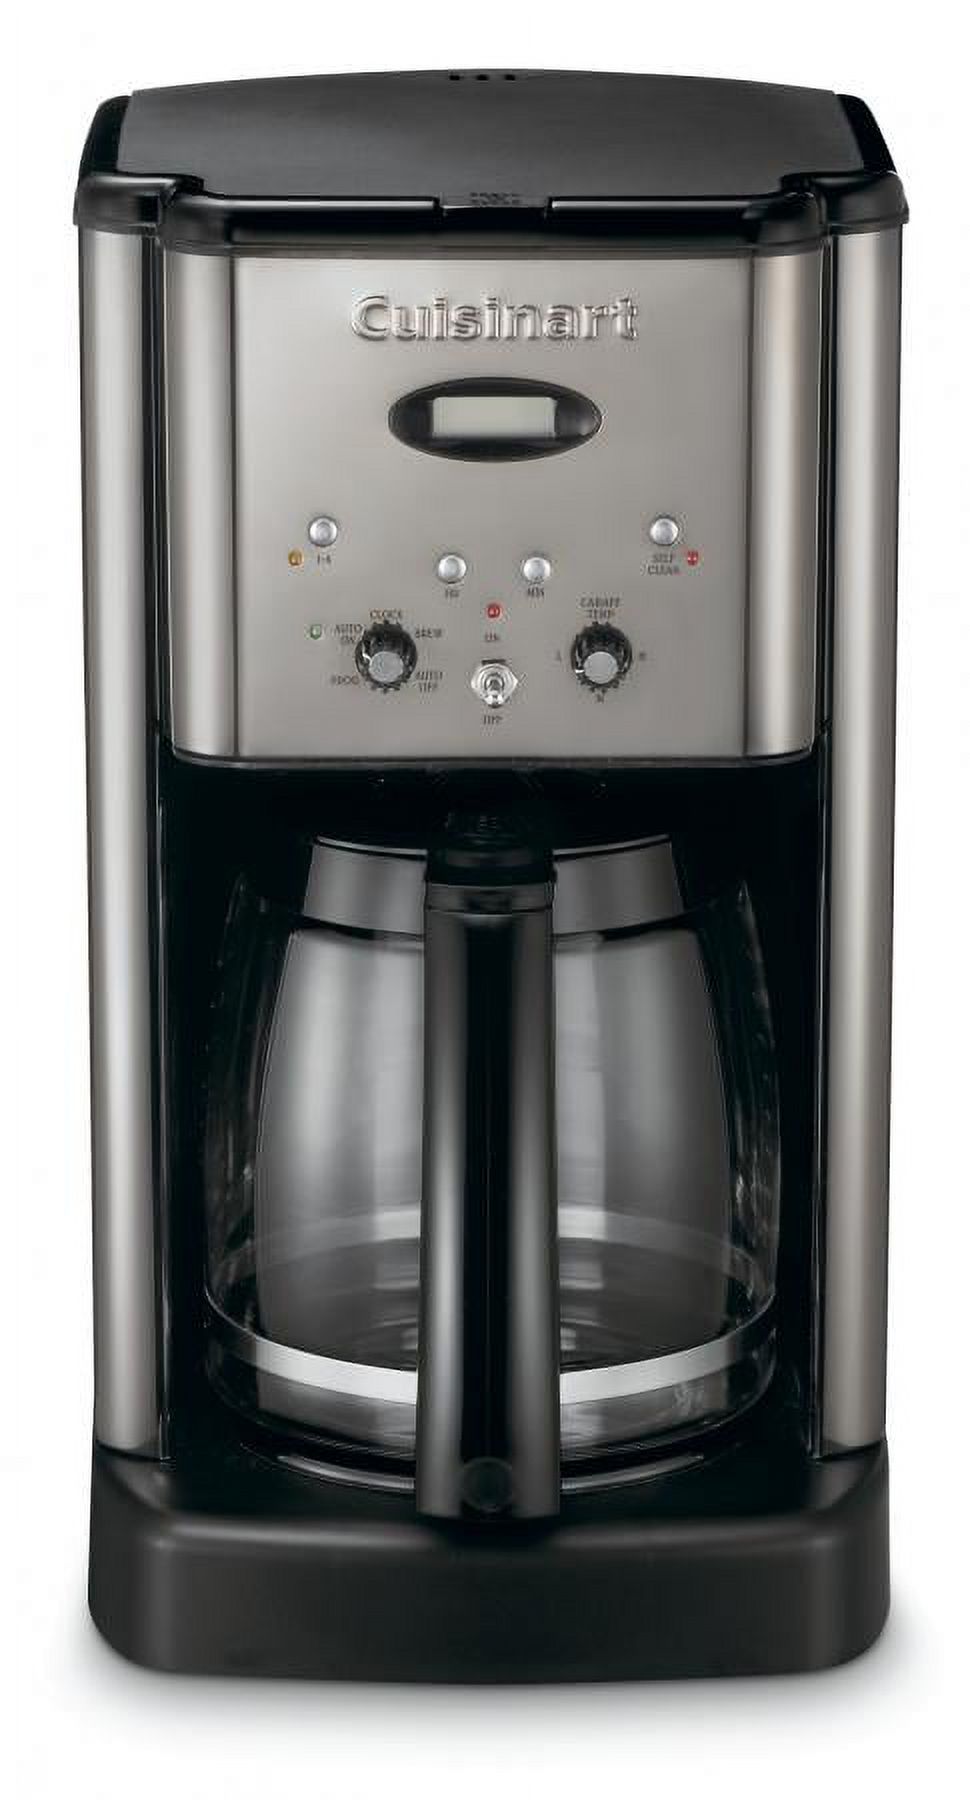 Cuisinart Brew Central™ 12 Cup Programmable Coffeemaker, DCC-1200WM1 - image 1 of 7